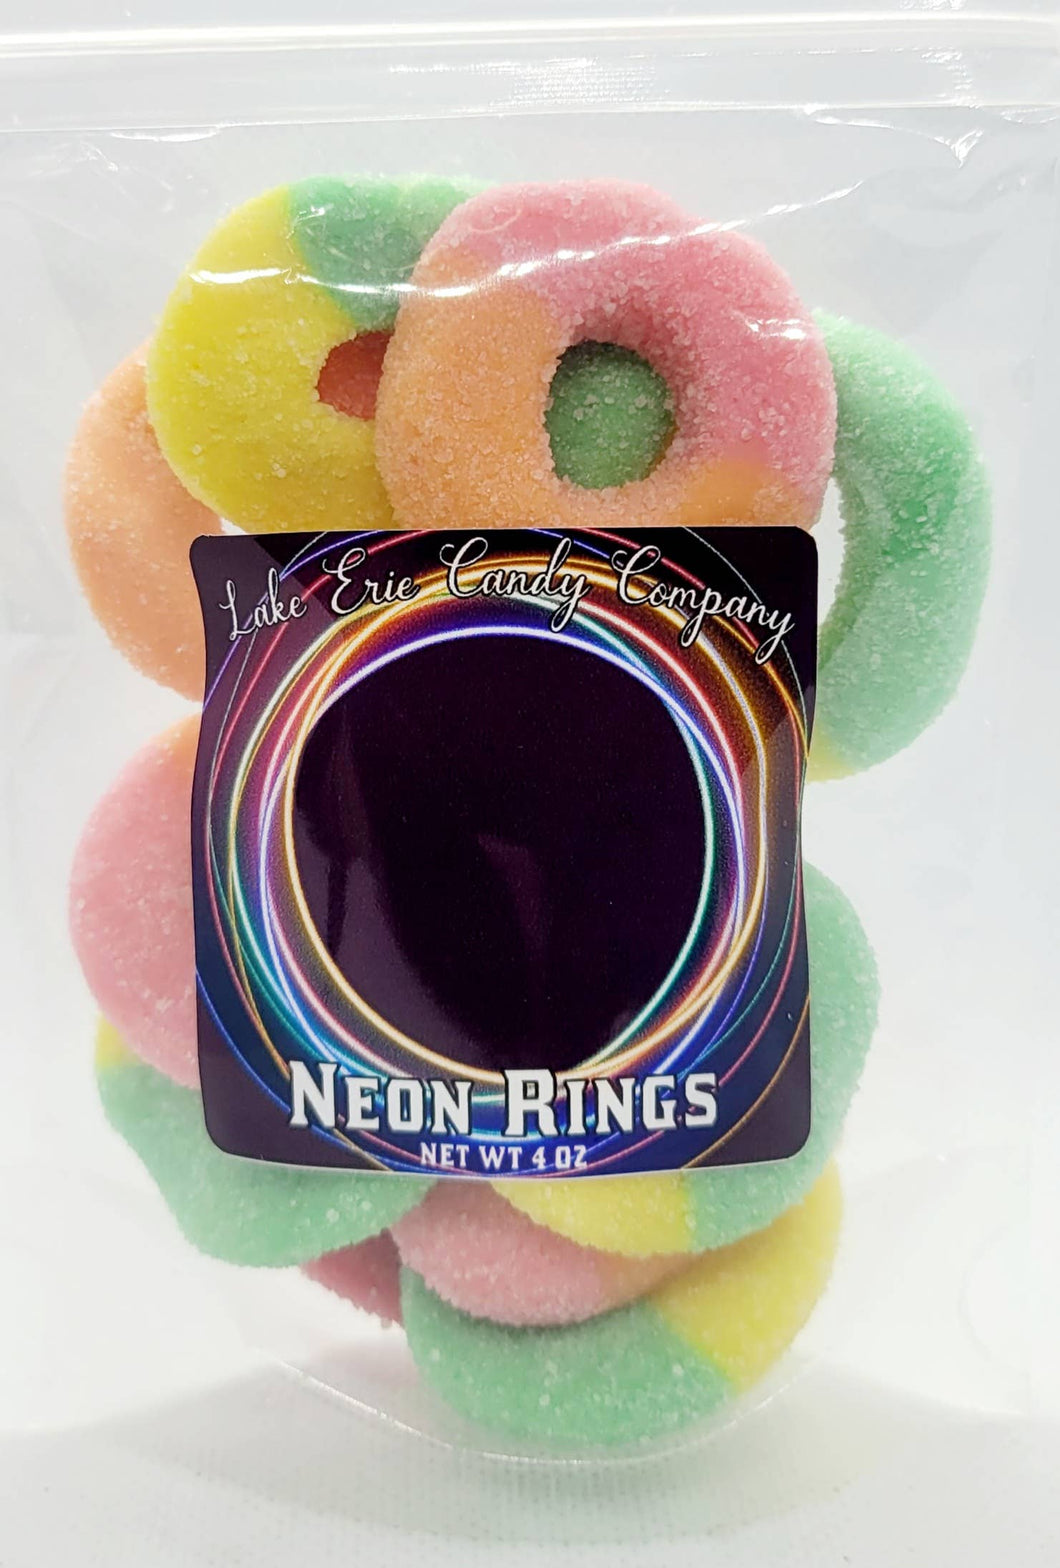 Lake Erie Candy Company - Neon Rings